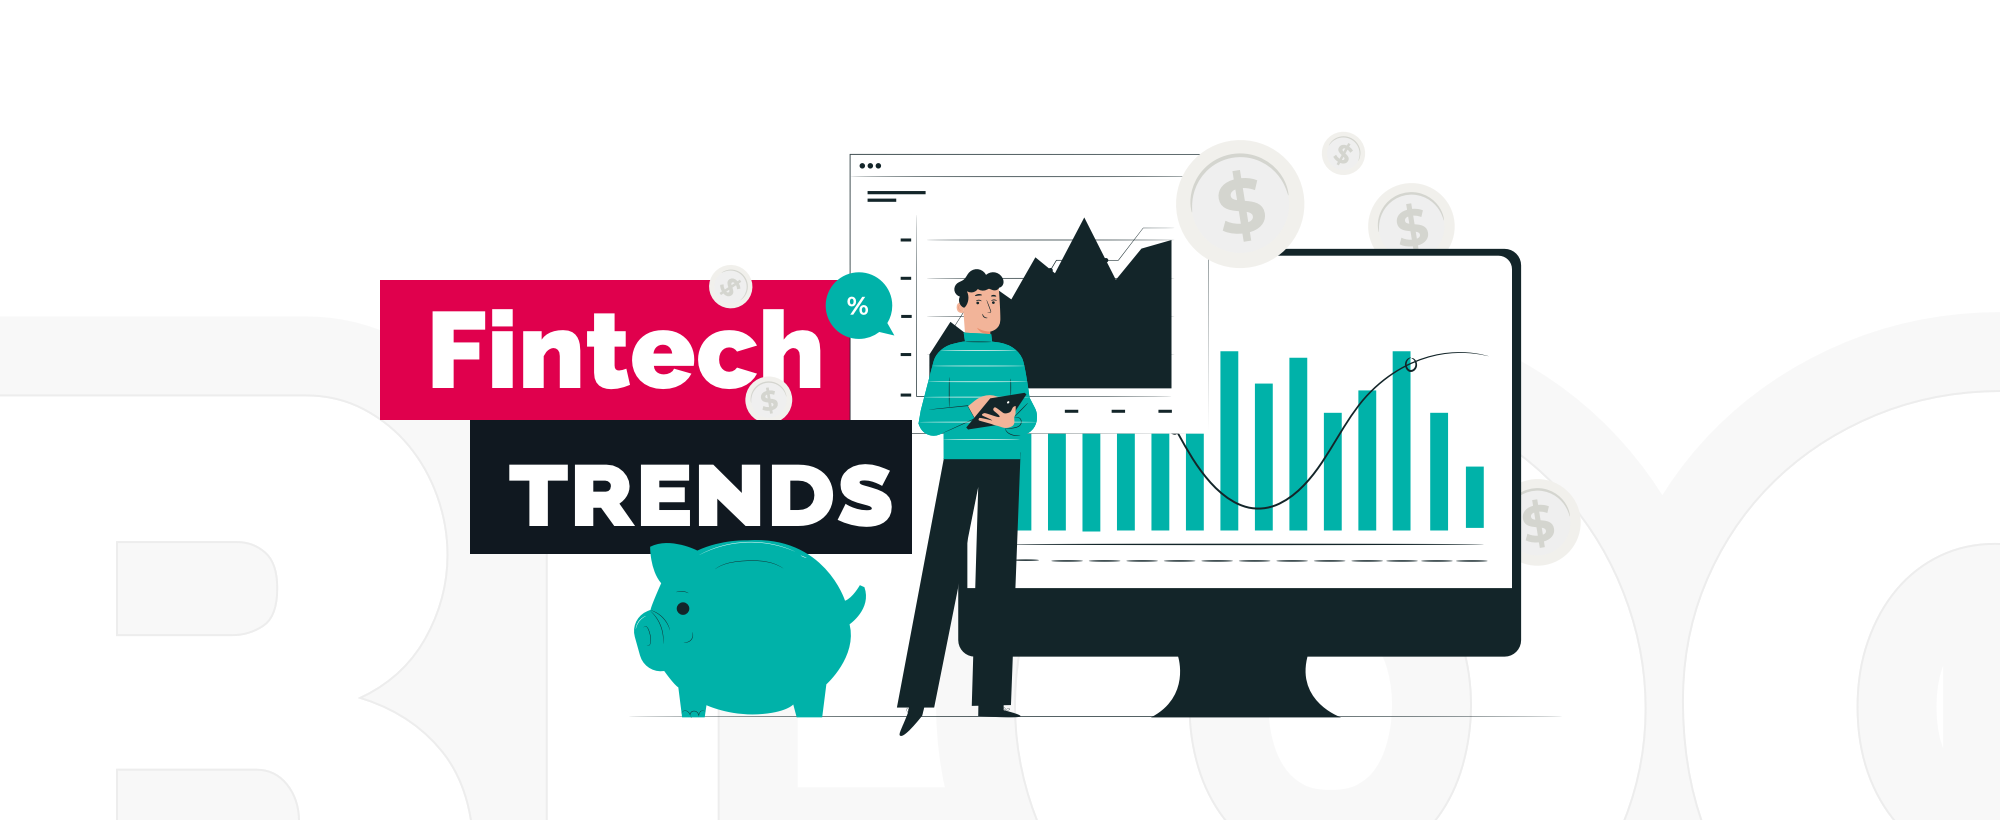 What are the Fintech Trends for 2021?